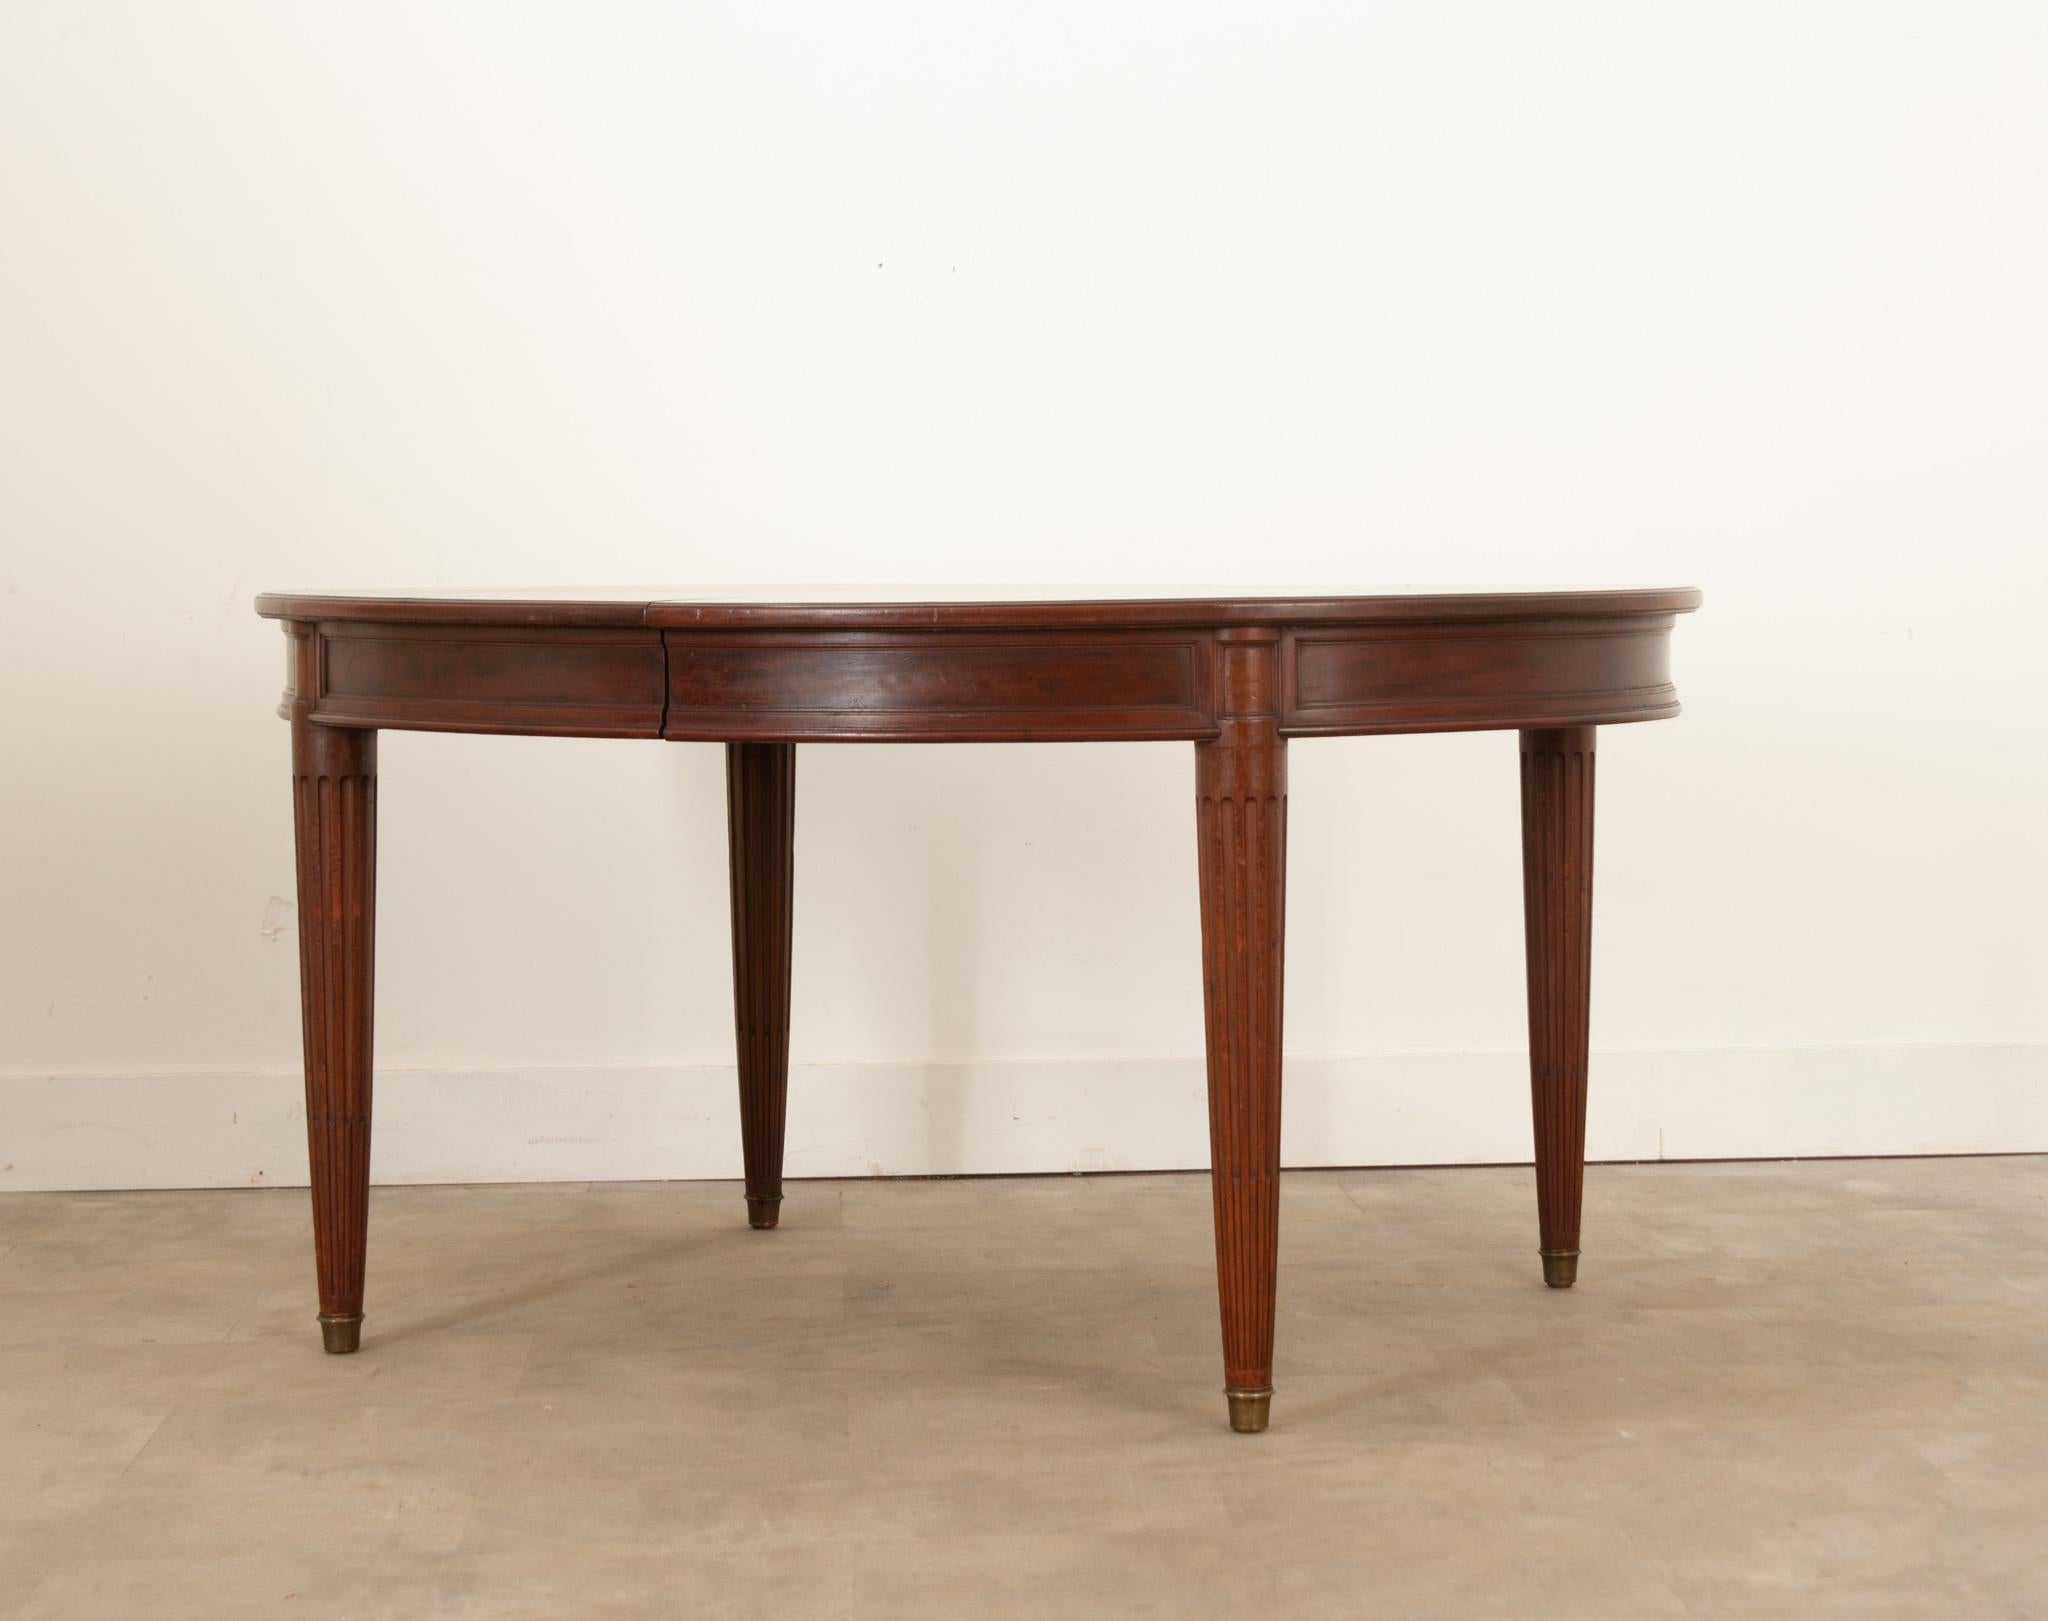 A great Louis XVI style extending dining room table from 19th century France crafted from beautifully aged mahogany. Three unfinished leaves are included and bring the table to 117-?” wide. The leaves are supported by a pair of hidden legs that